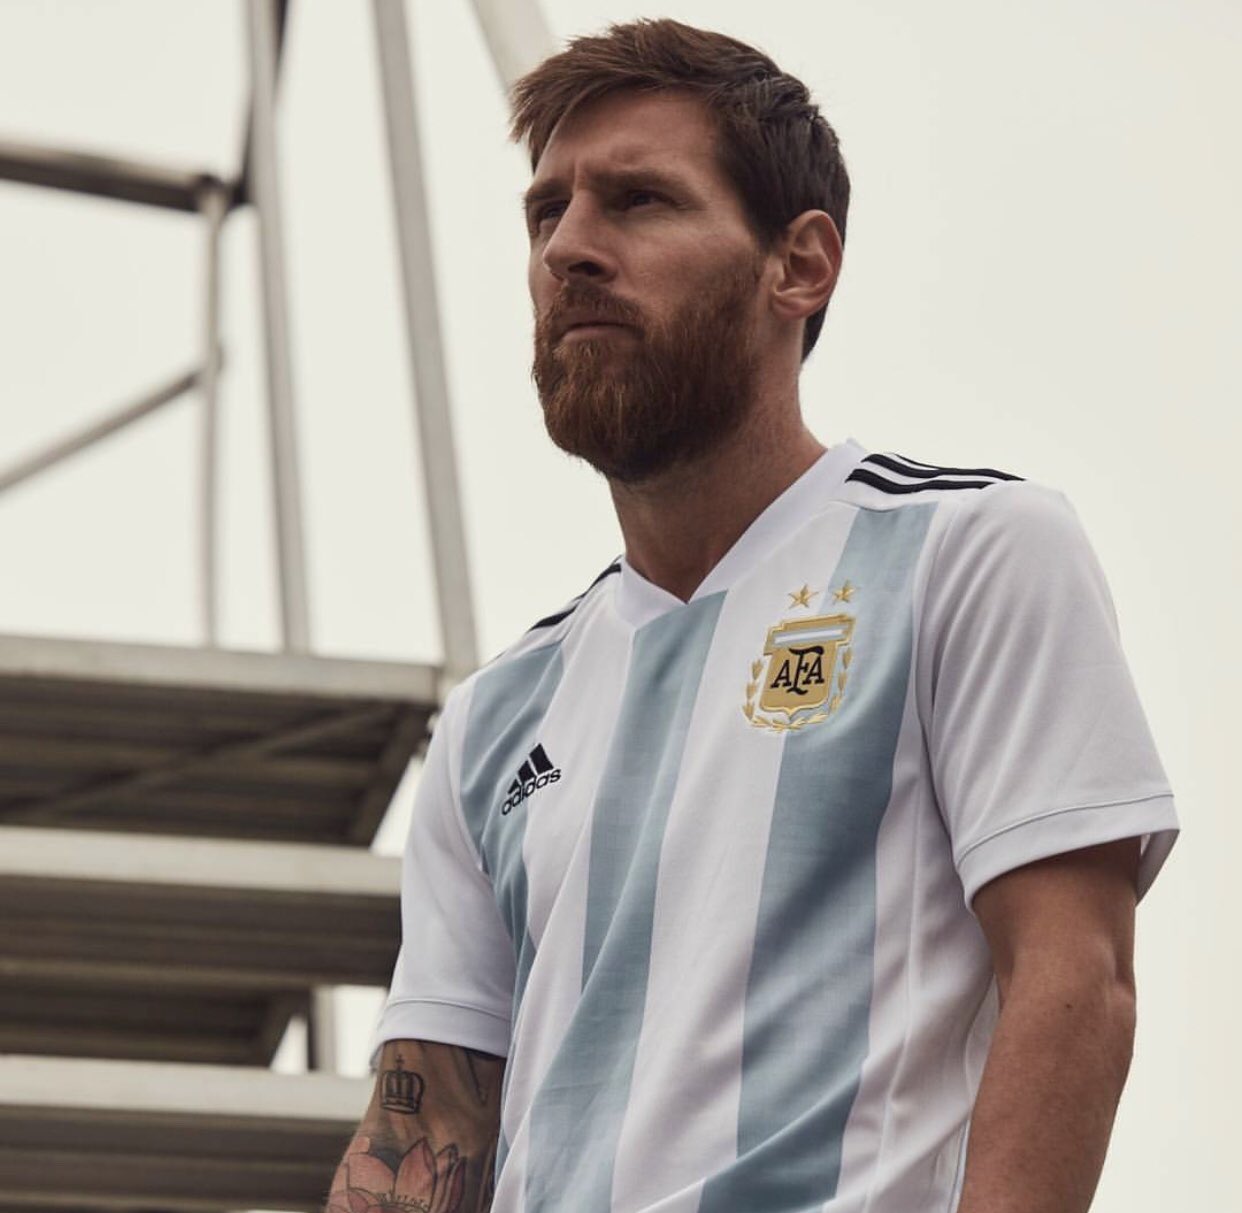 Barça Insider on X: "Leo Messi in the Argentina national kit for the World  Cup 2018 [via leomessi on instagram] https://t.co/mQOadizRWc" / X